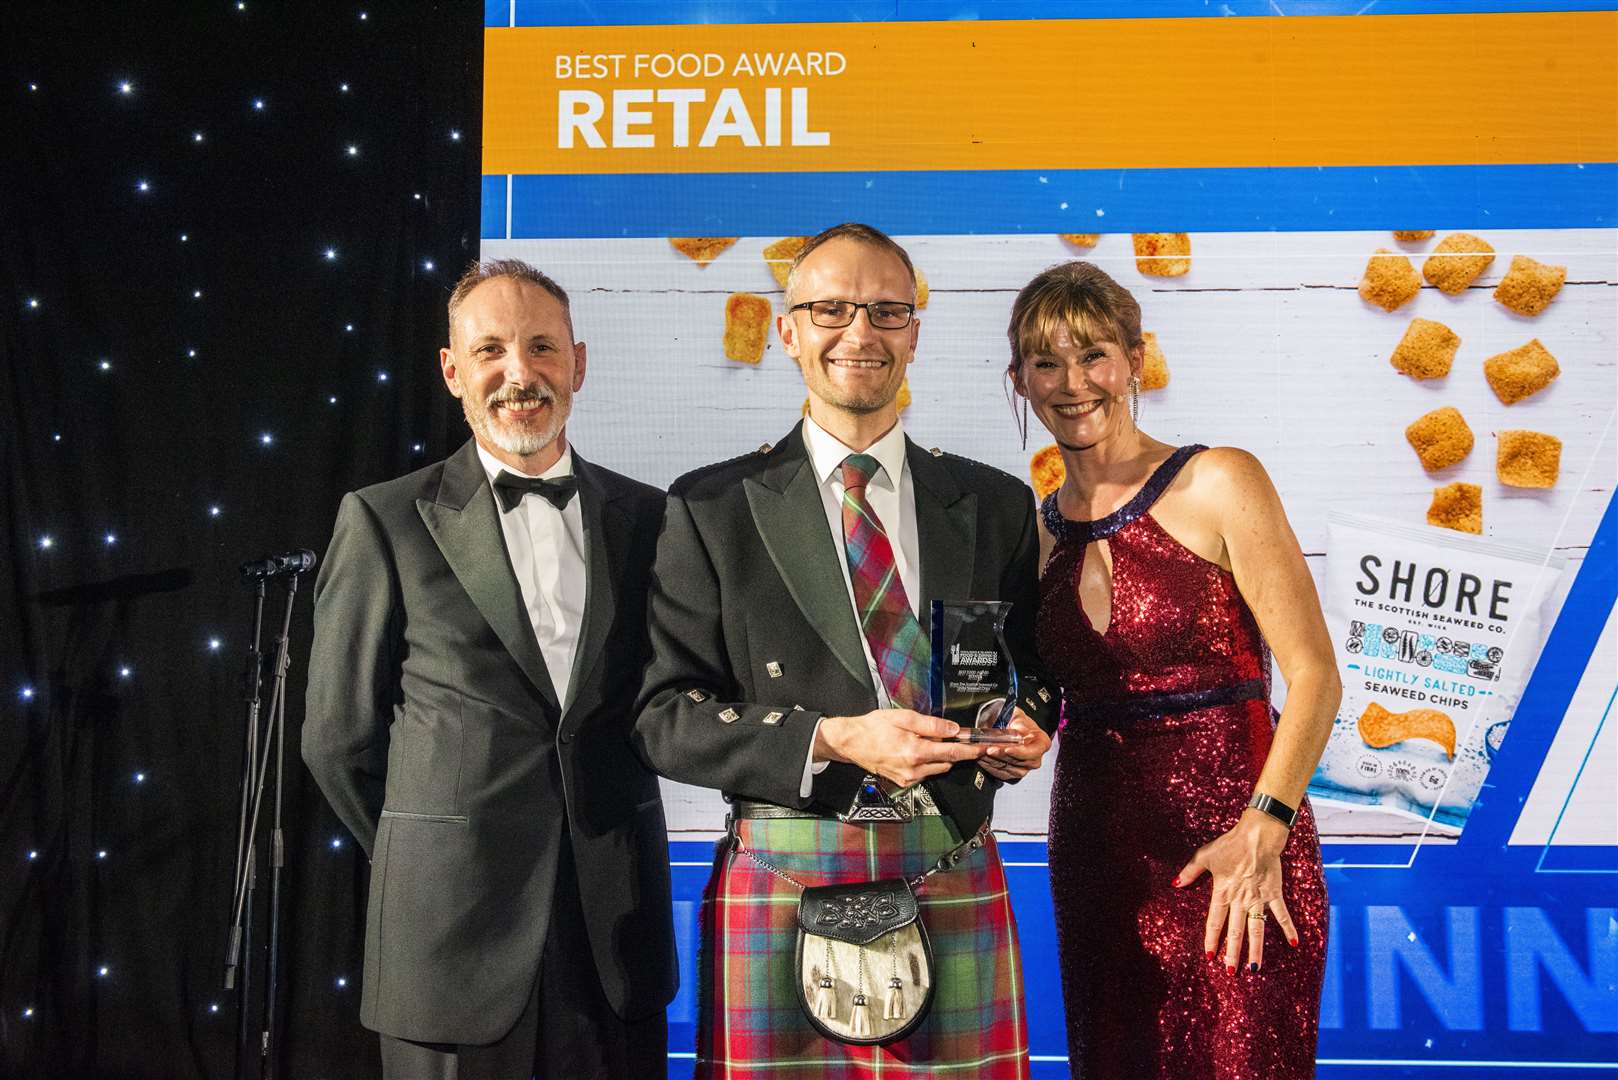 Peter Elbourne of Shore seaweed company after receiving the award from Douglas Hardie, with host Nicky Marr looking on. Picture: Chris Watt Photography